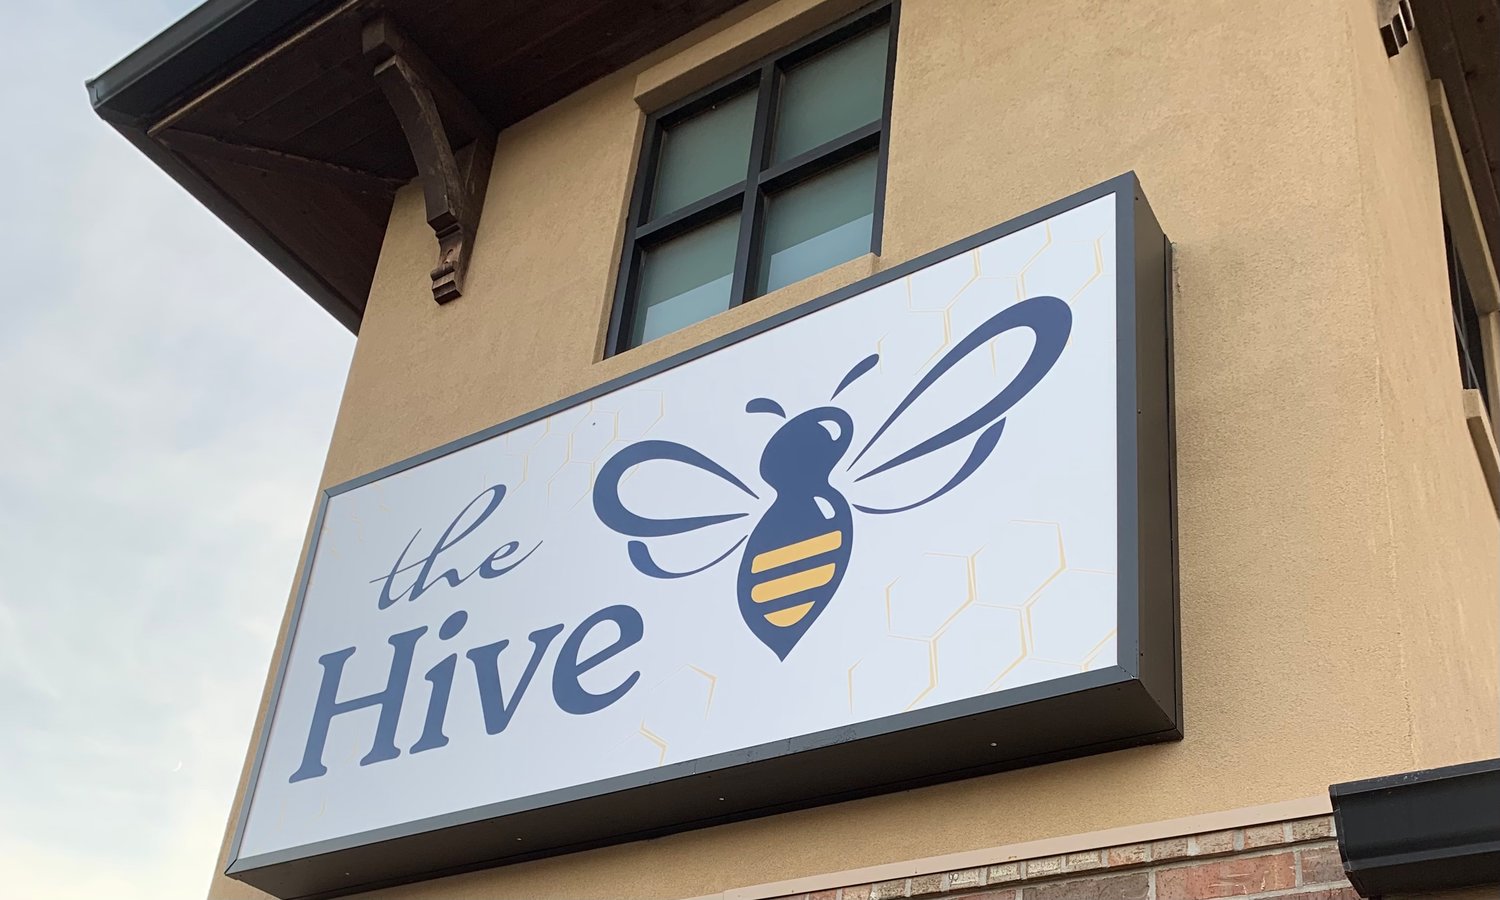 The Hive, a cafe in Willard, aims to open next month.